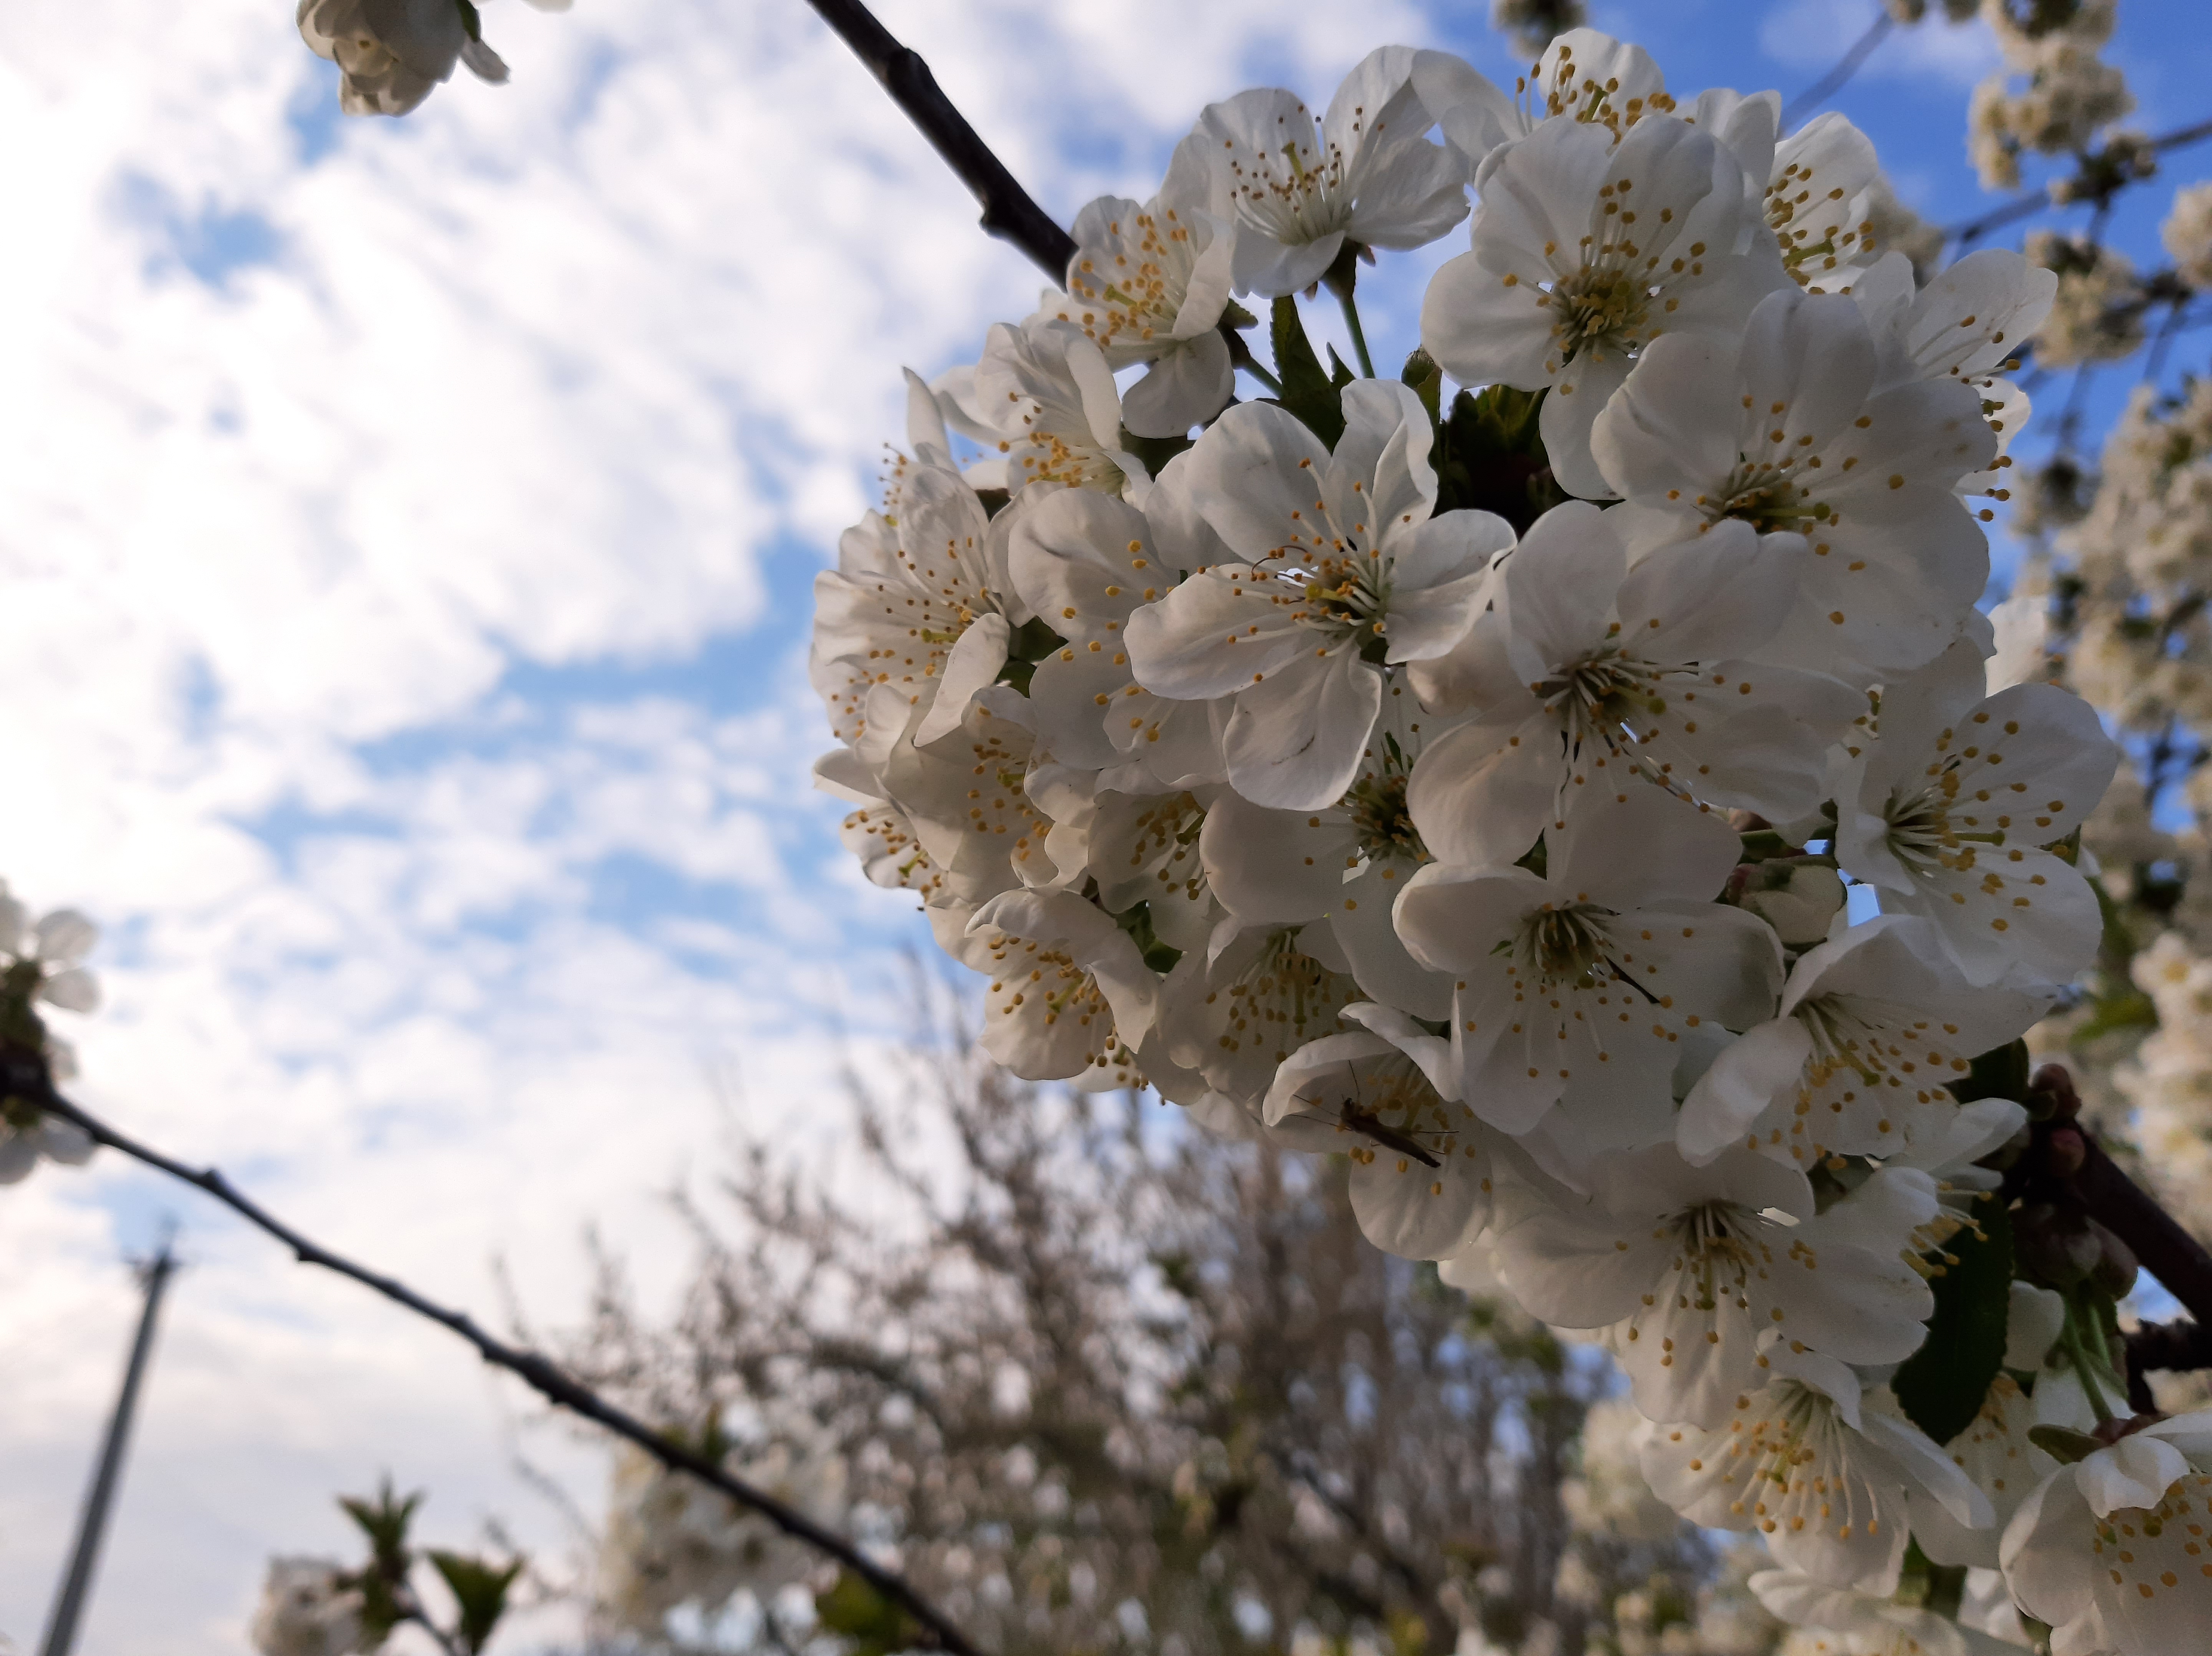 A branch with white flowers